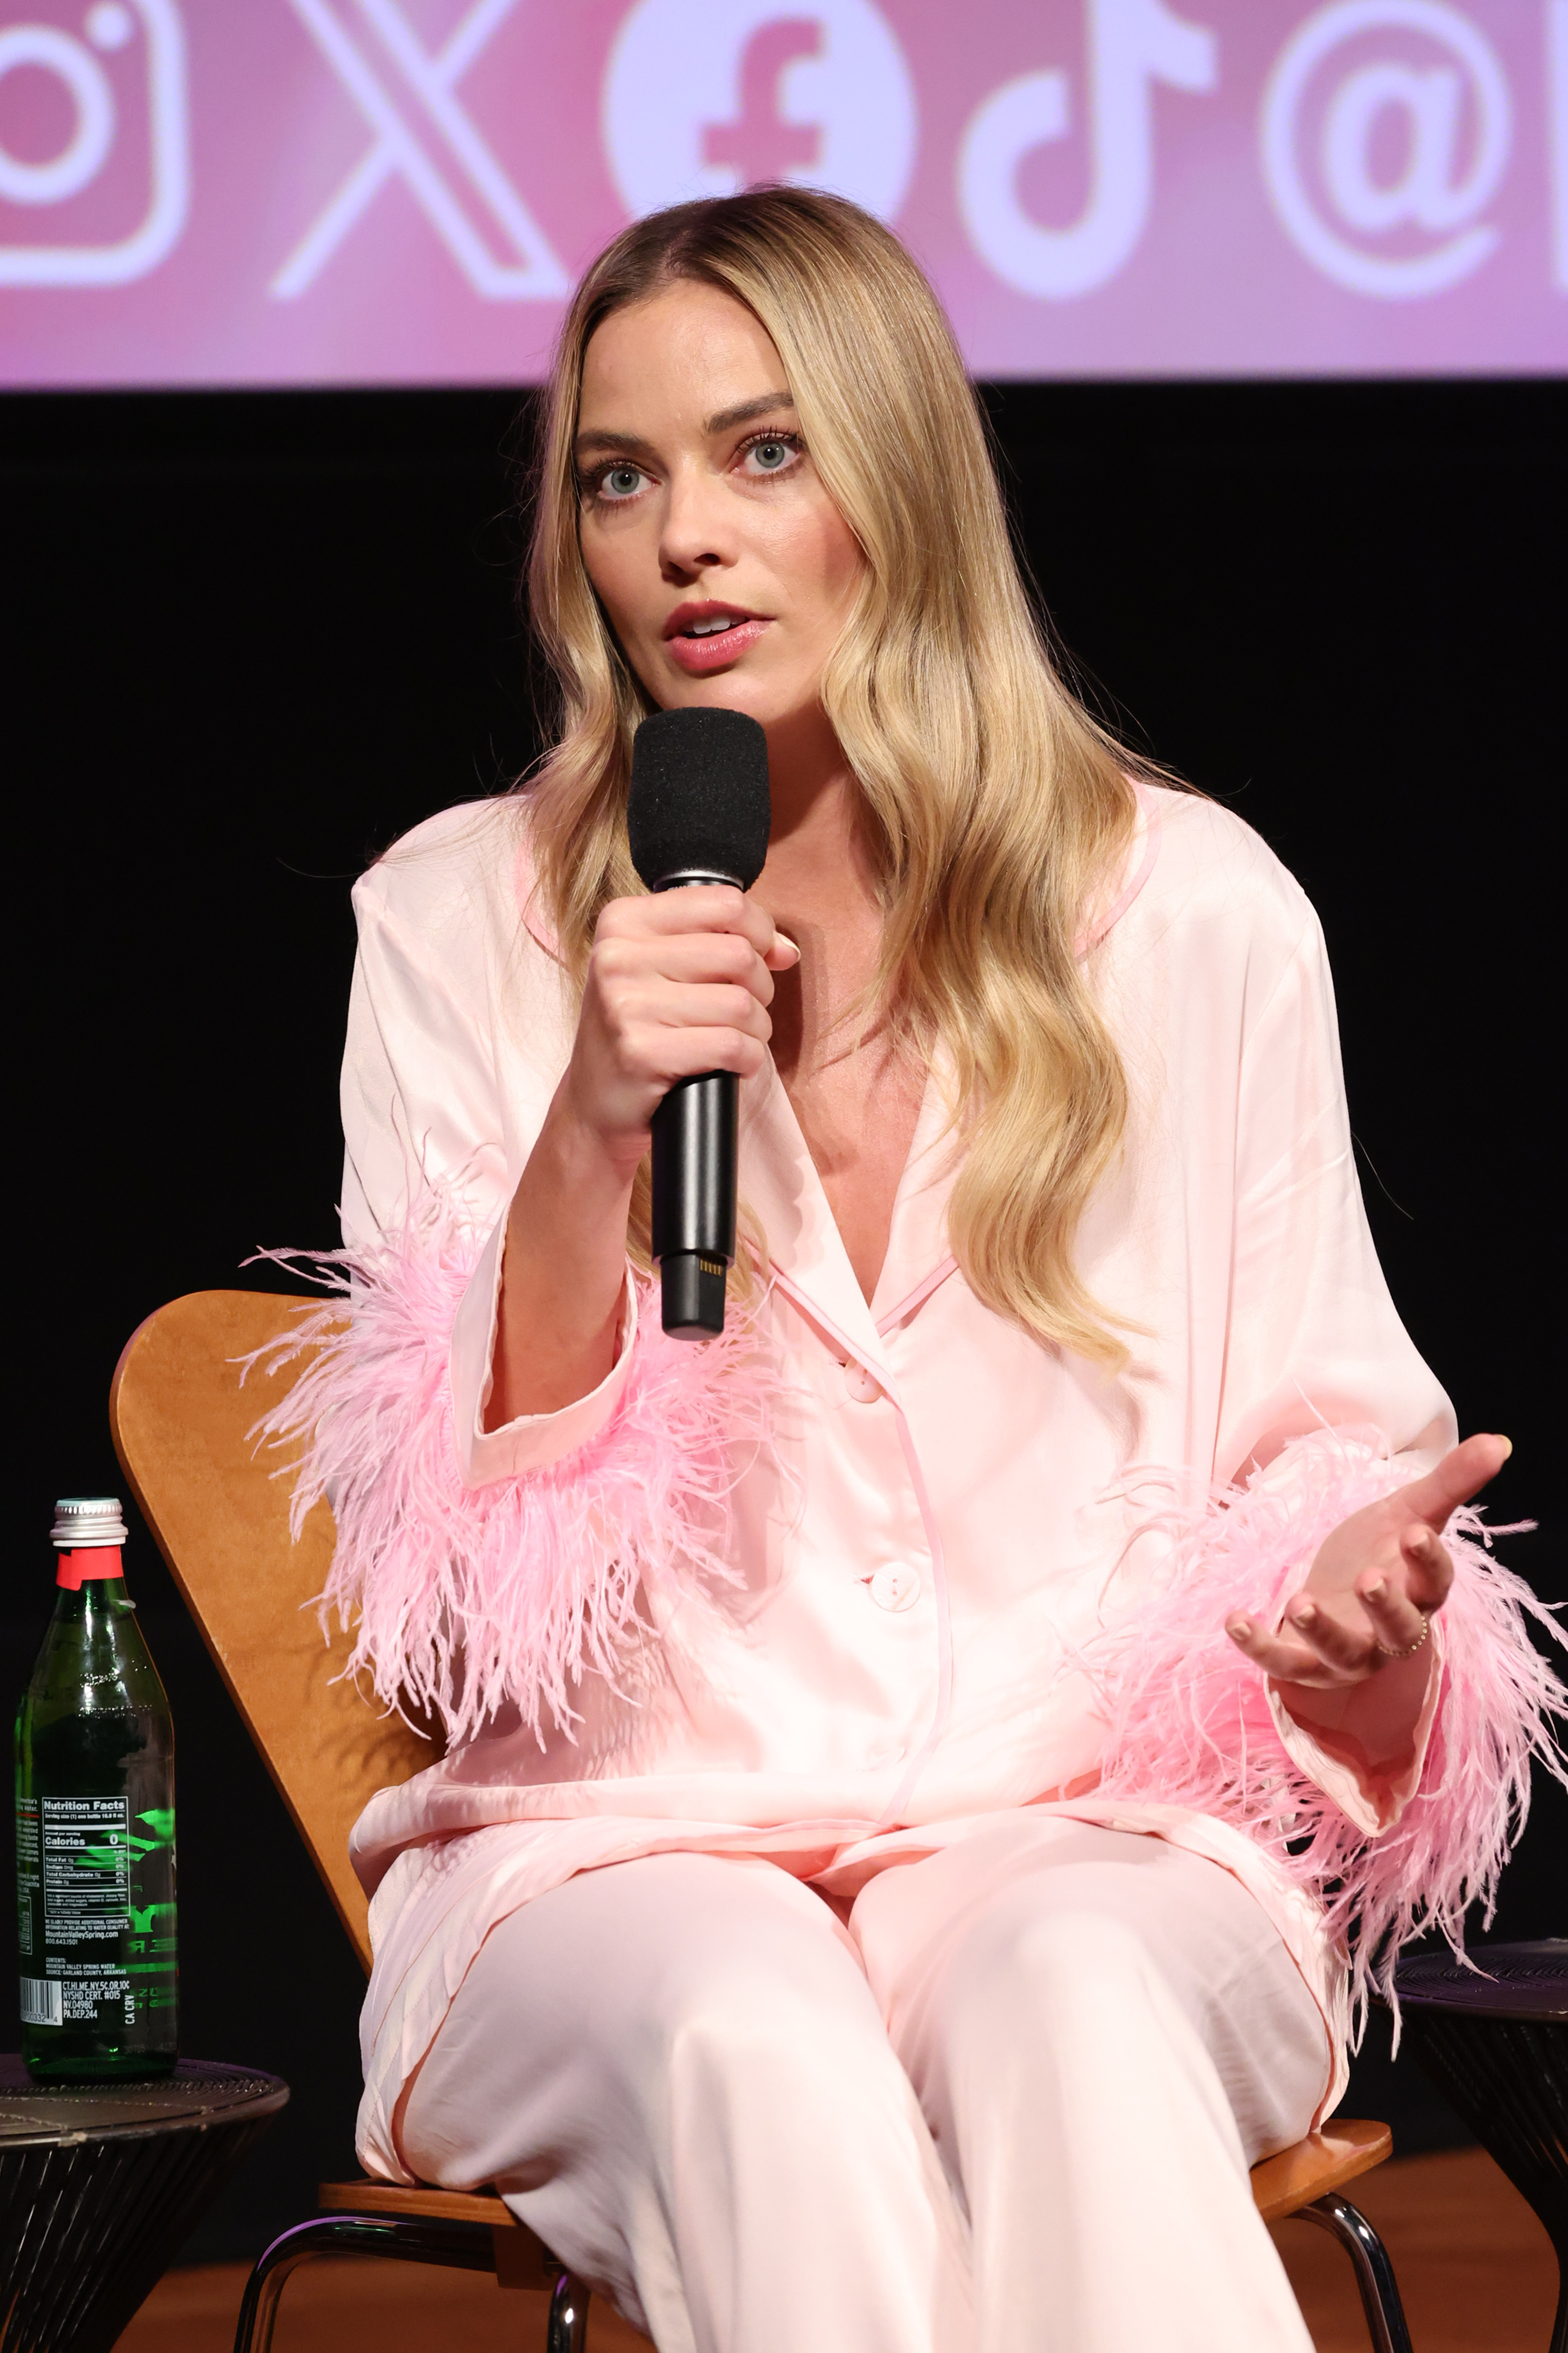 Close-up of Margot holding a microphone and sitting at a media event